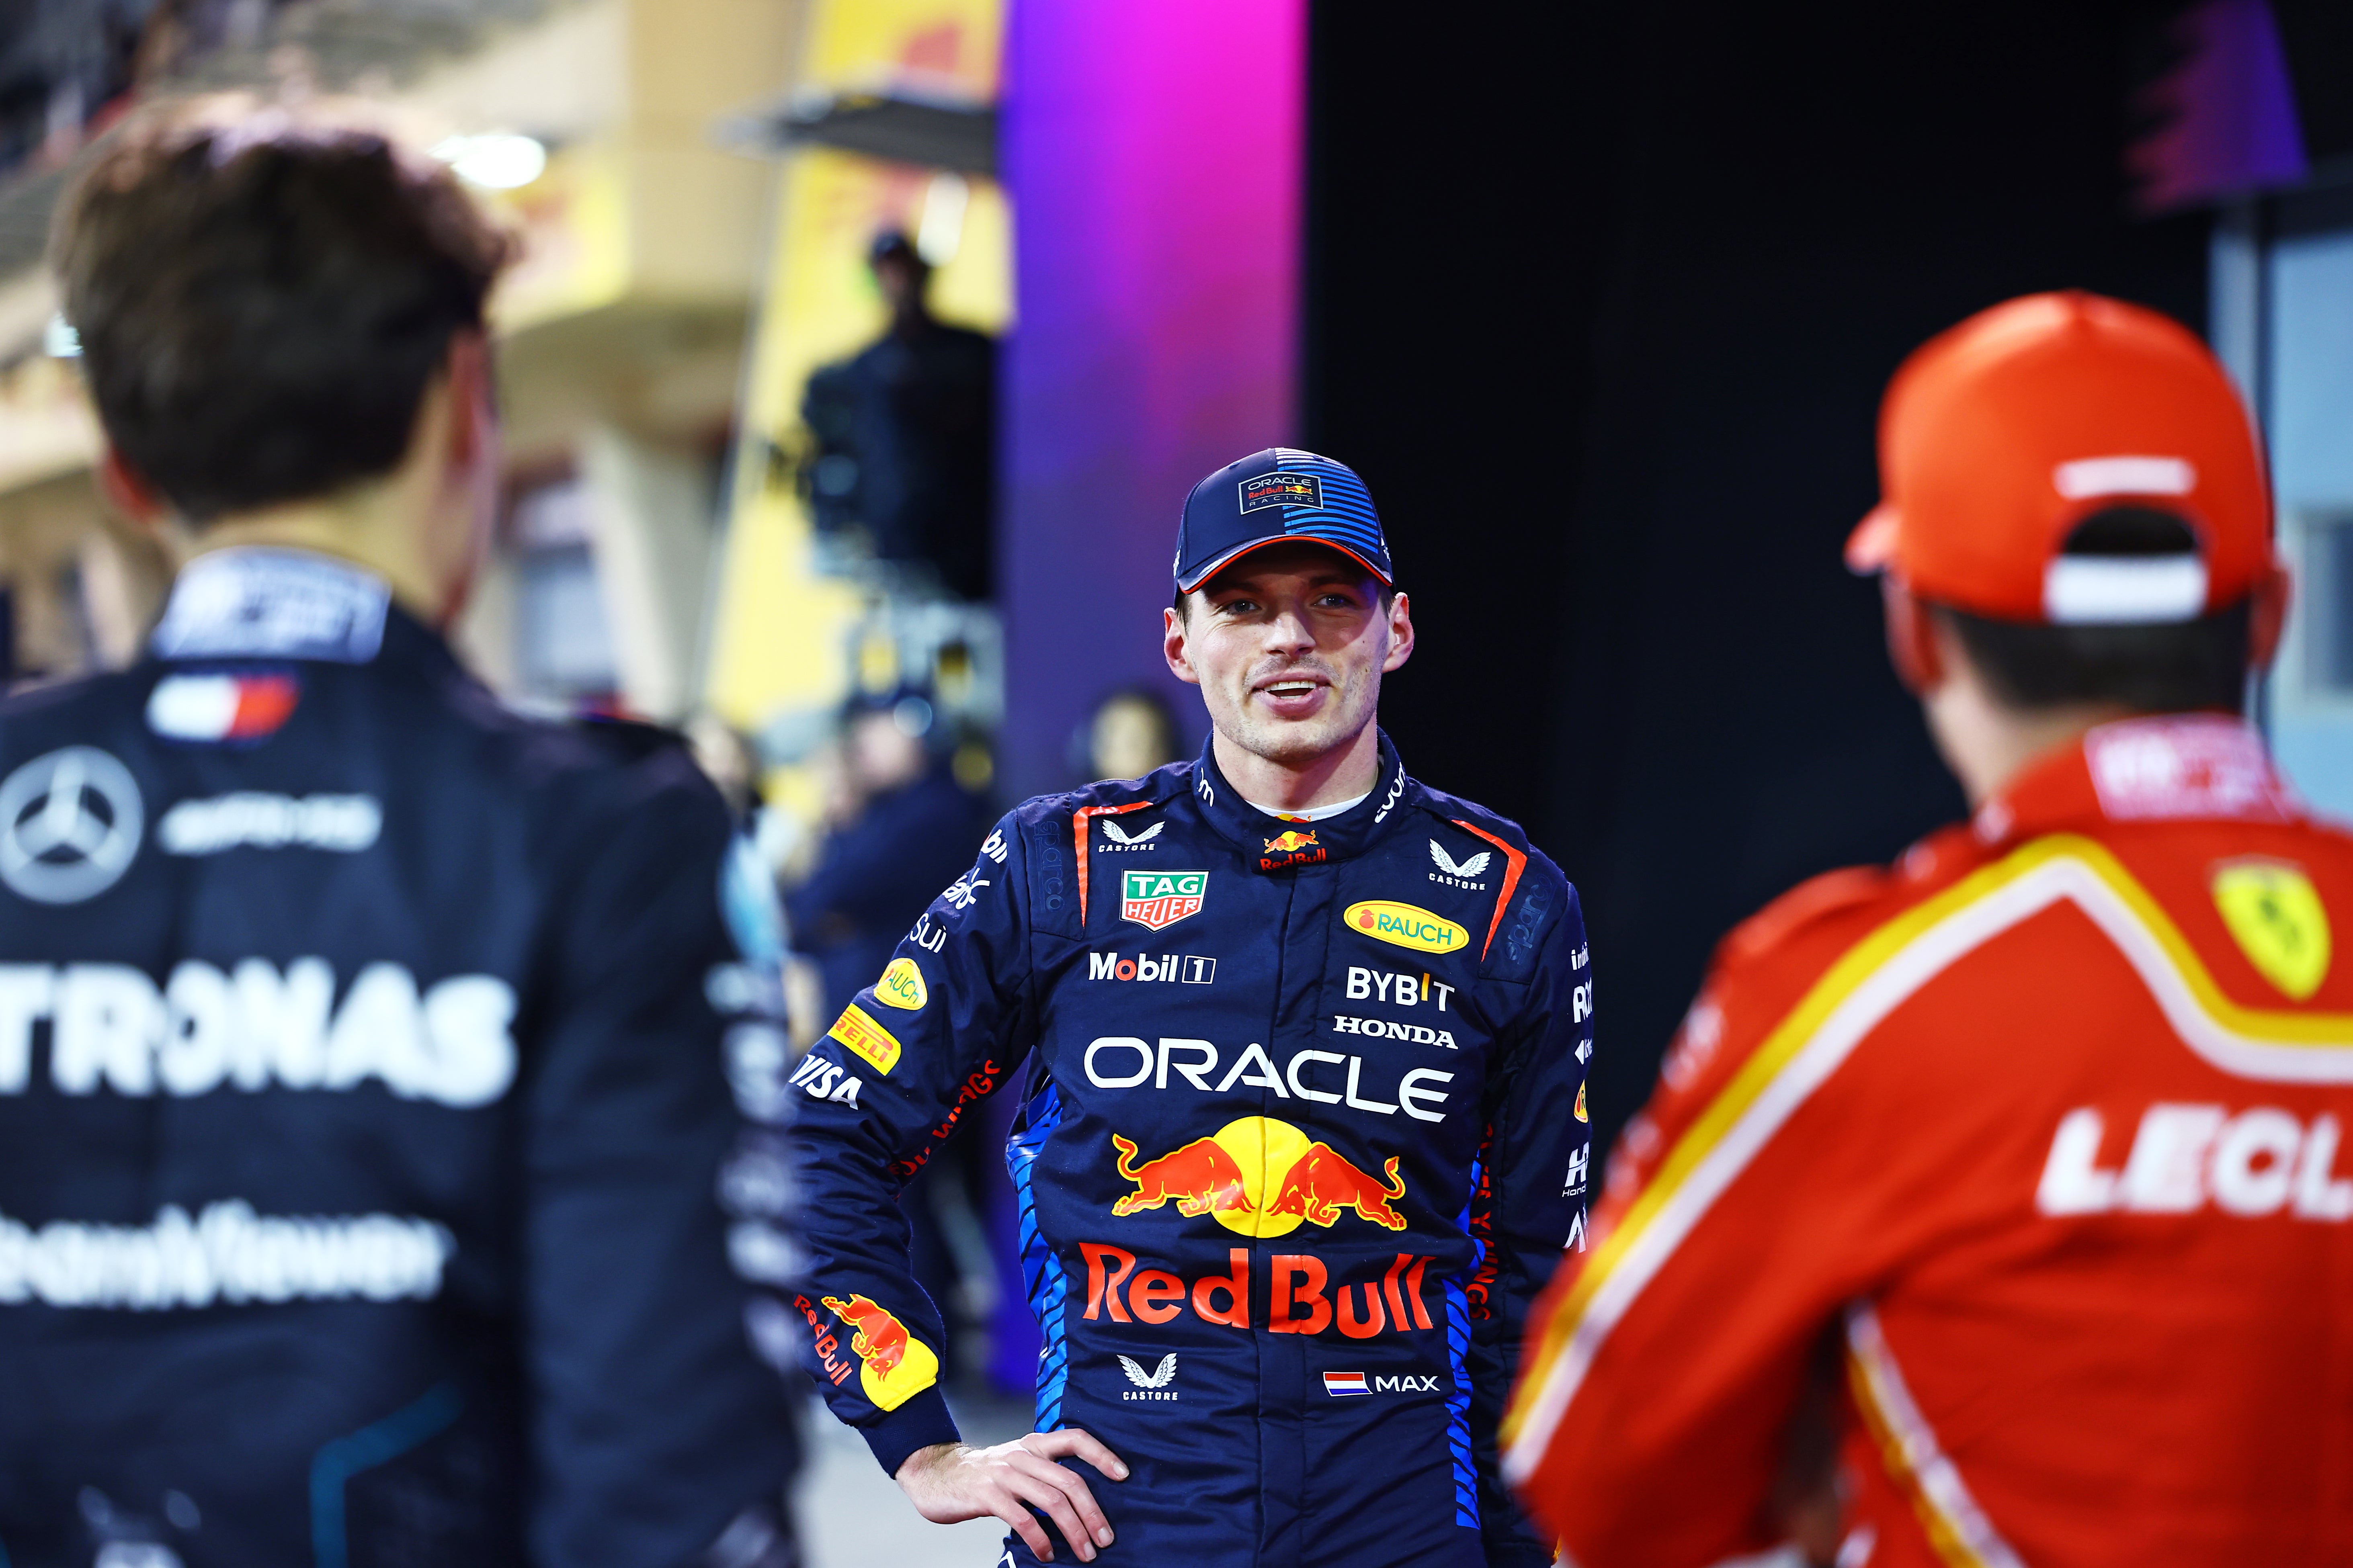 Max Verstappen claimed pole position for the Bahrain Grand Prix